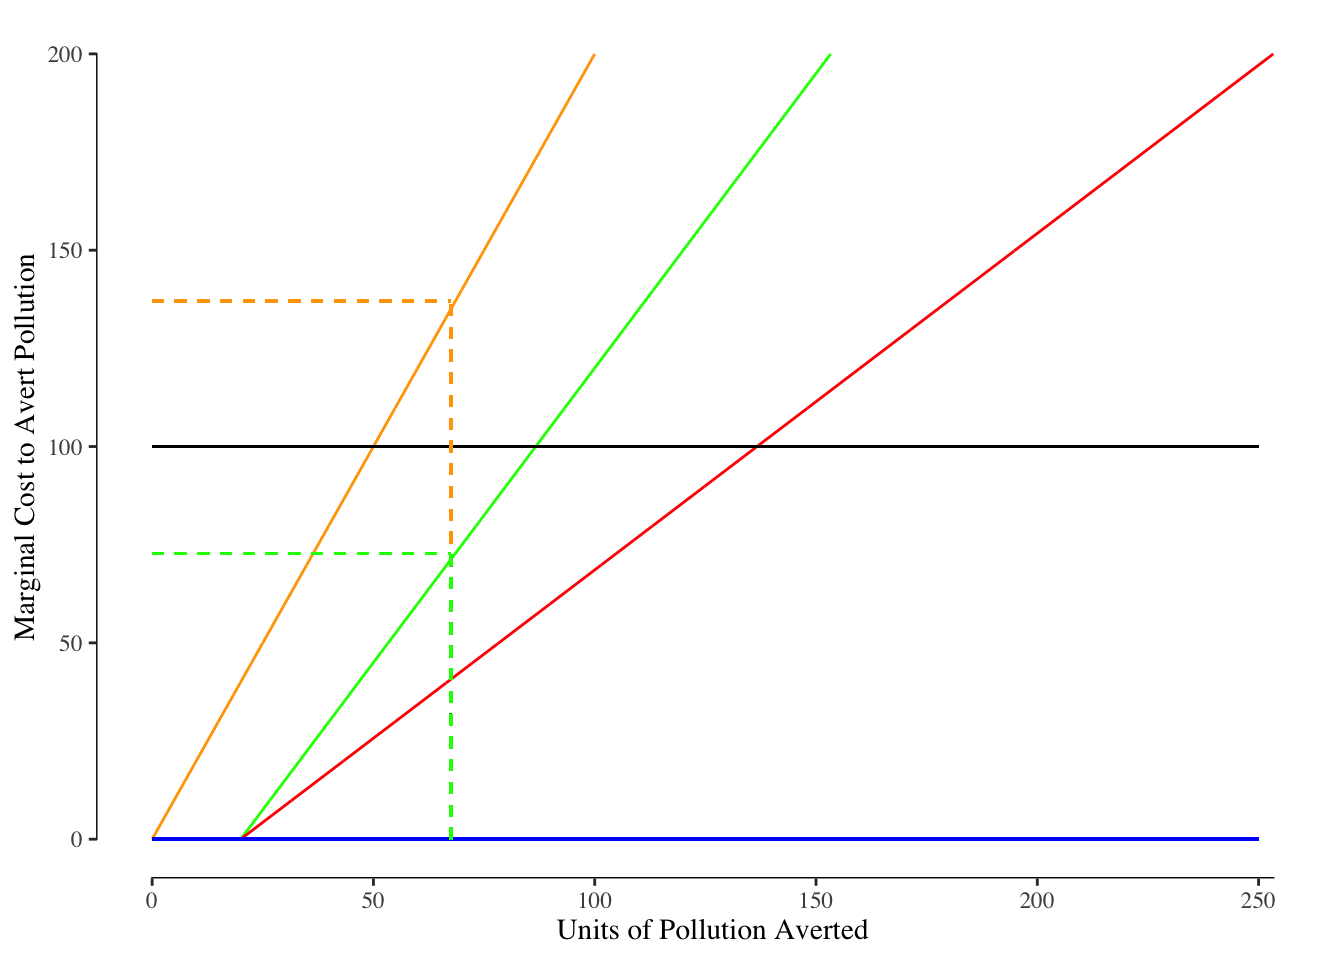 Effect of Quantity Reduction Mandate. The solid blue line reflects the demand curve for both Factory A and Factory B and is constantly zero. The solid black line reflects the demand from society - in other words the marginal harm per unit of pollution. The green line is the marginal cost of reduction for Factory A while the orange line is the marginal cost of pollution reduction for Factory B. The total cost of a reduction is shown in the solid red line. The dashed lines denote the quantity and the marginal cost assoicated with a 67.5 unit reduction in emissions.